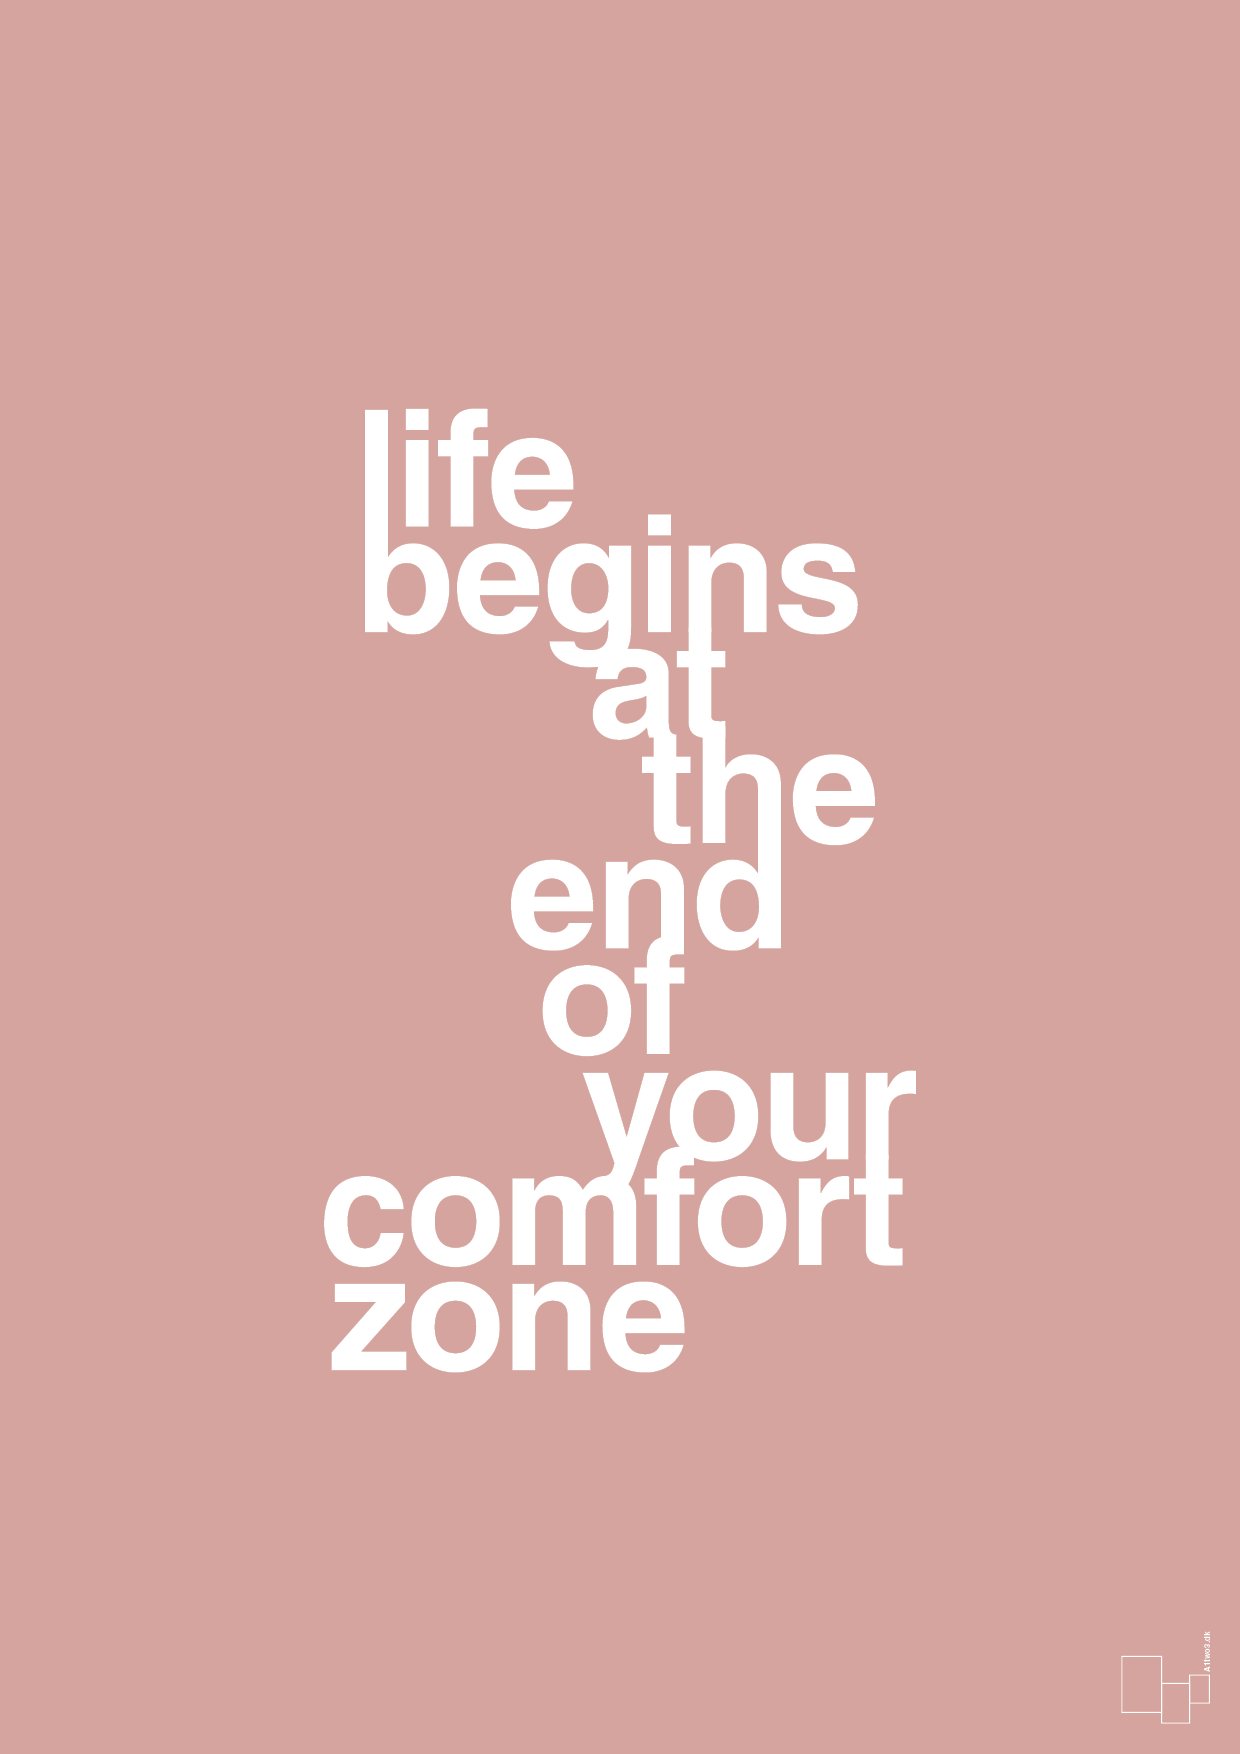 life begins at the end of your comfort zone - Plakat med Ordsprog i Bubble Shell